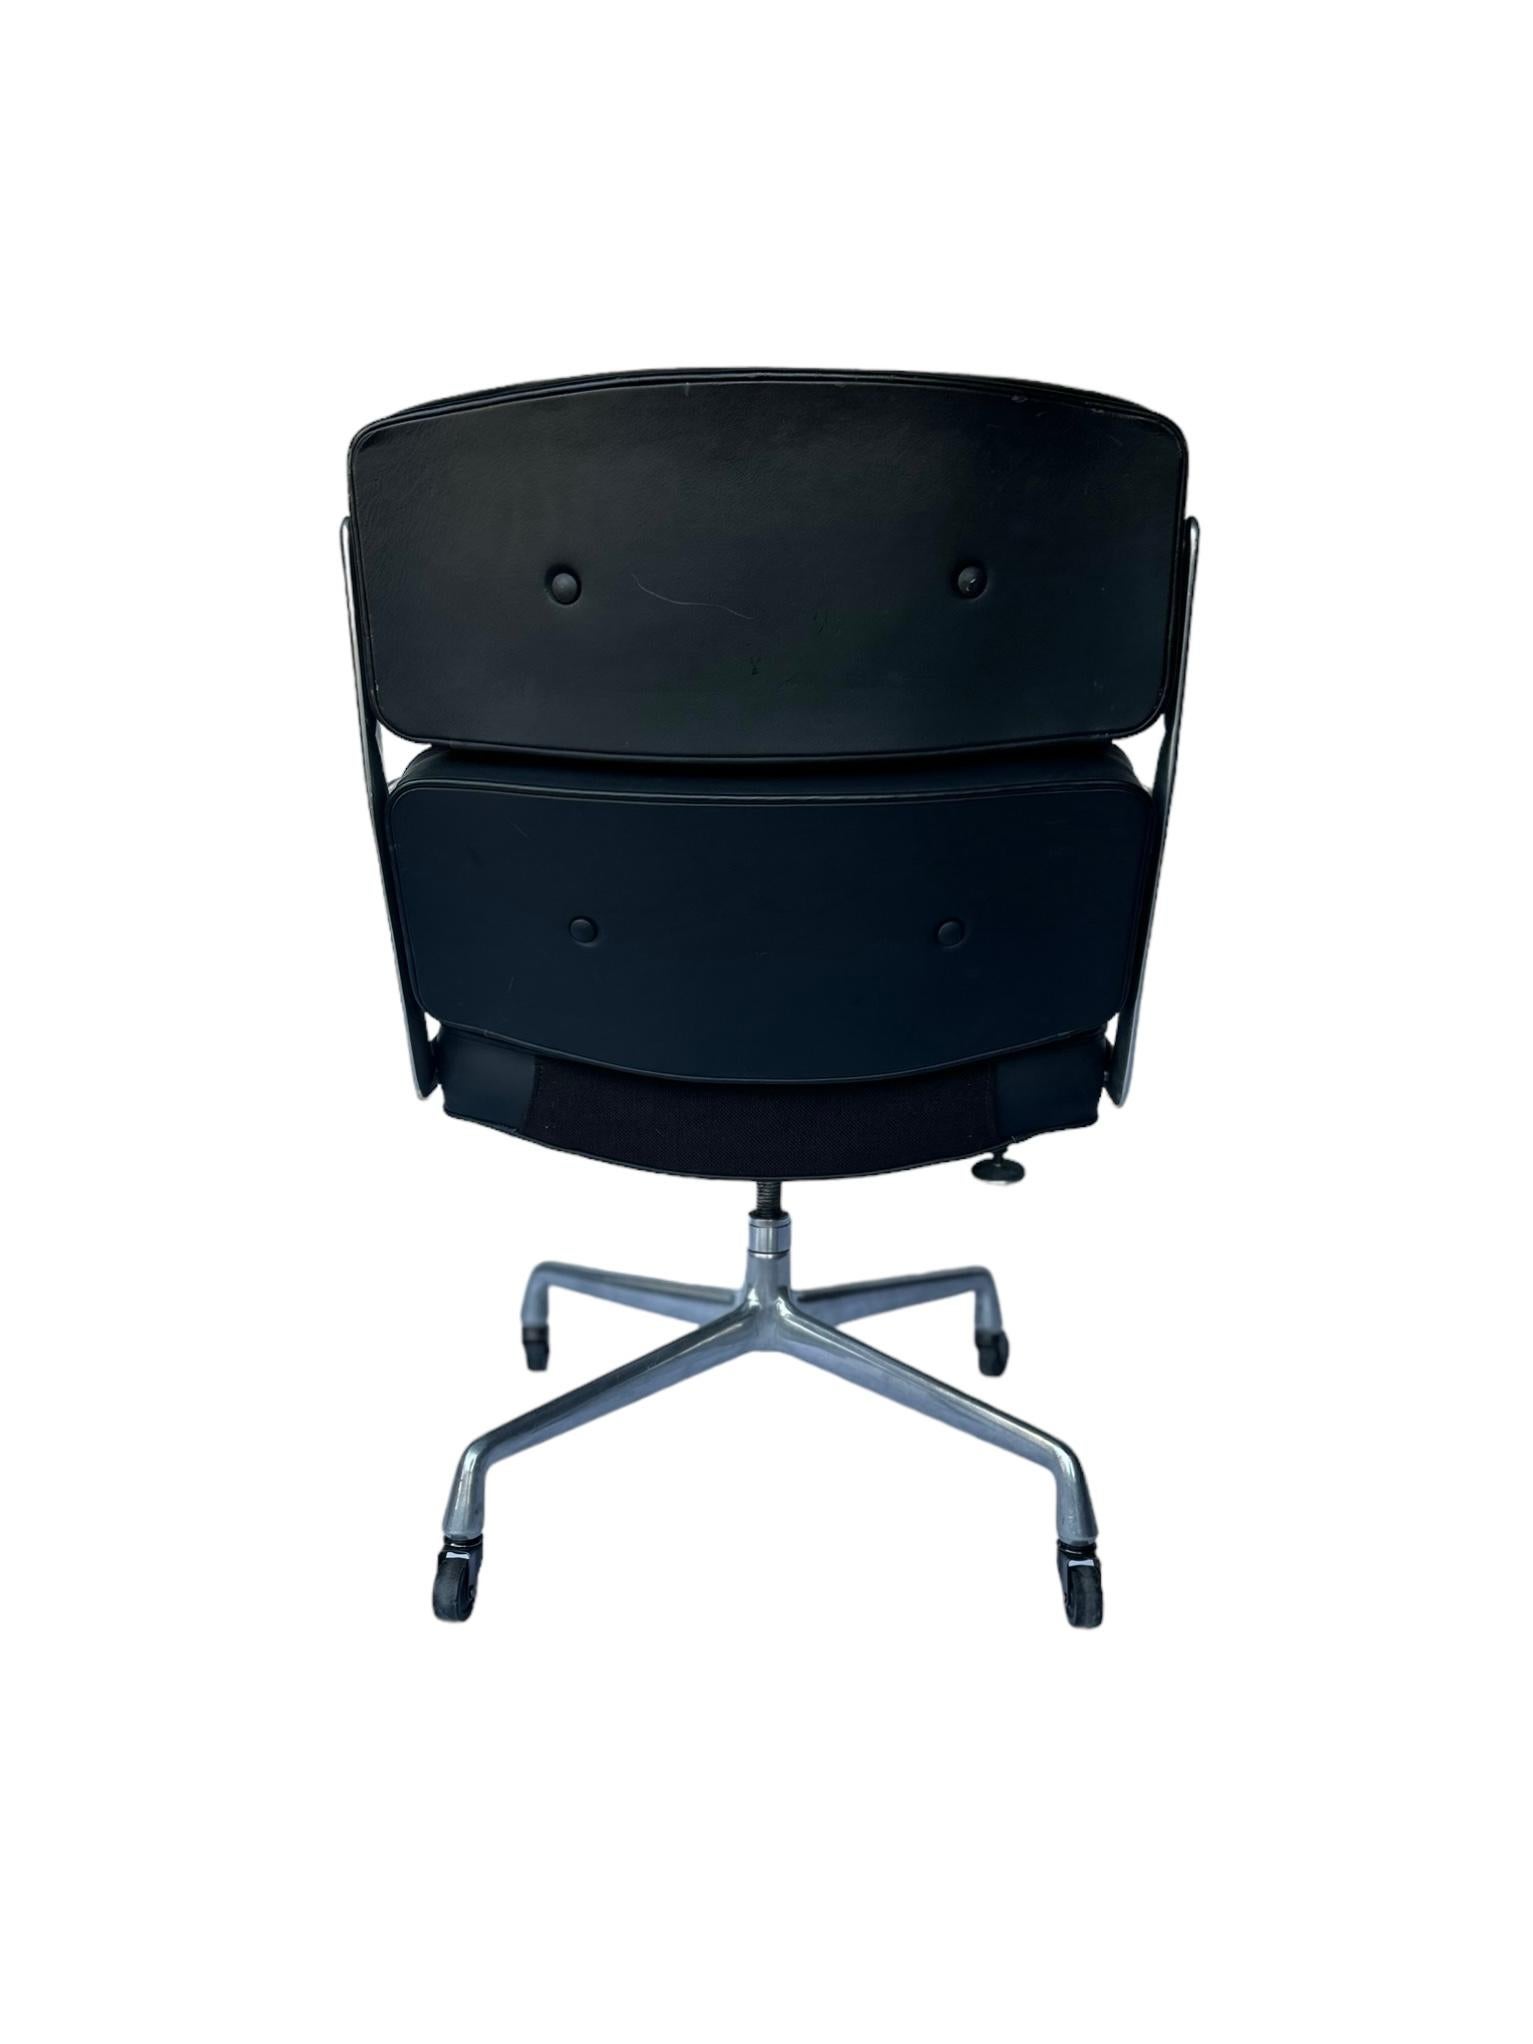 Mid-Century Modern Eames Time Life Office Desk Chair in Black Leather For Sale